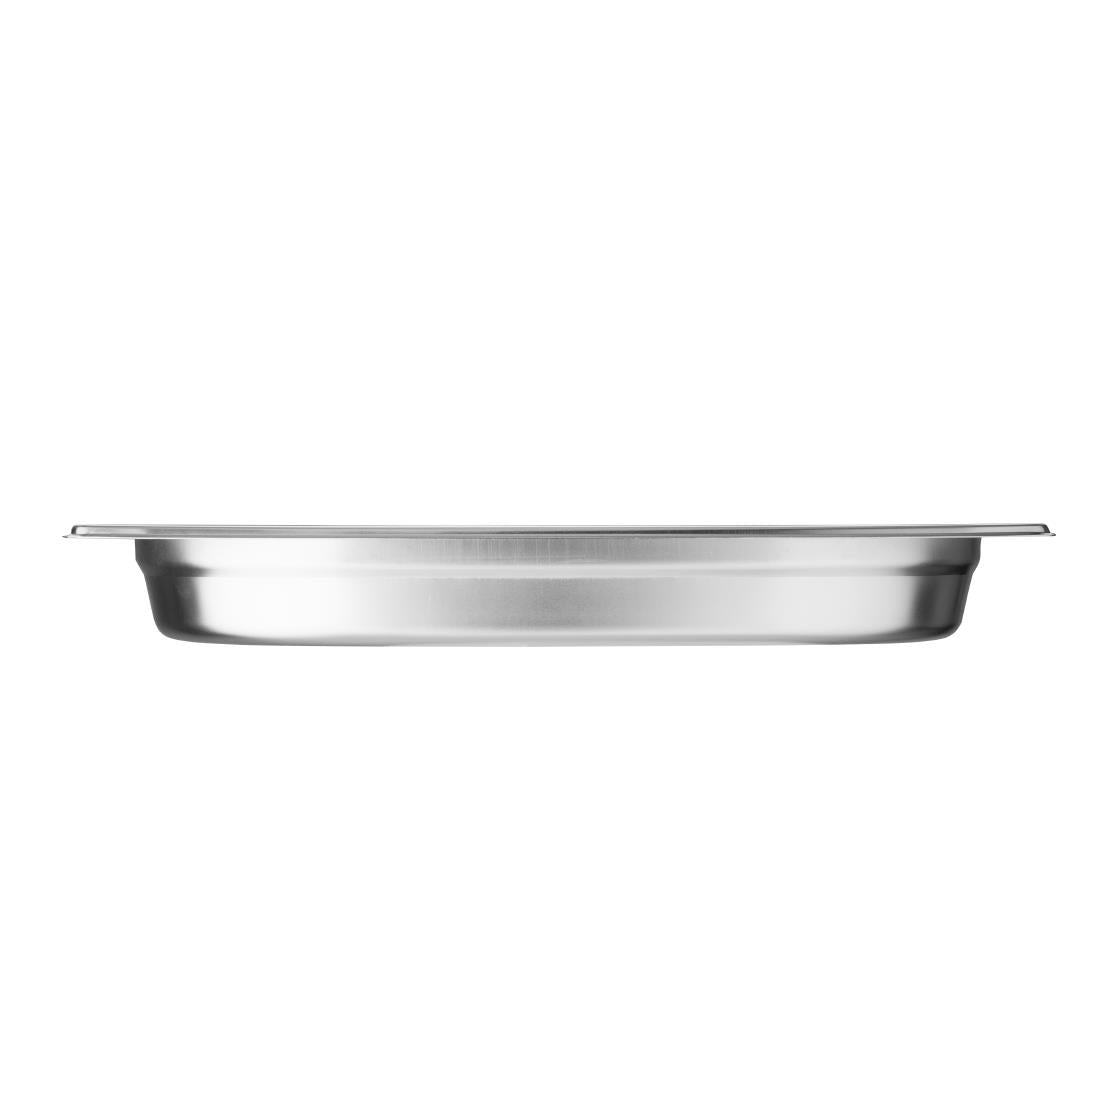 Vogue Stainless Steel 1/2 Gastronorm Pan 40mm